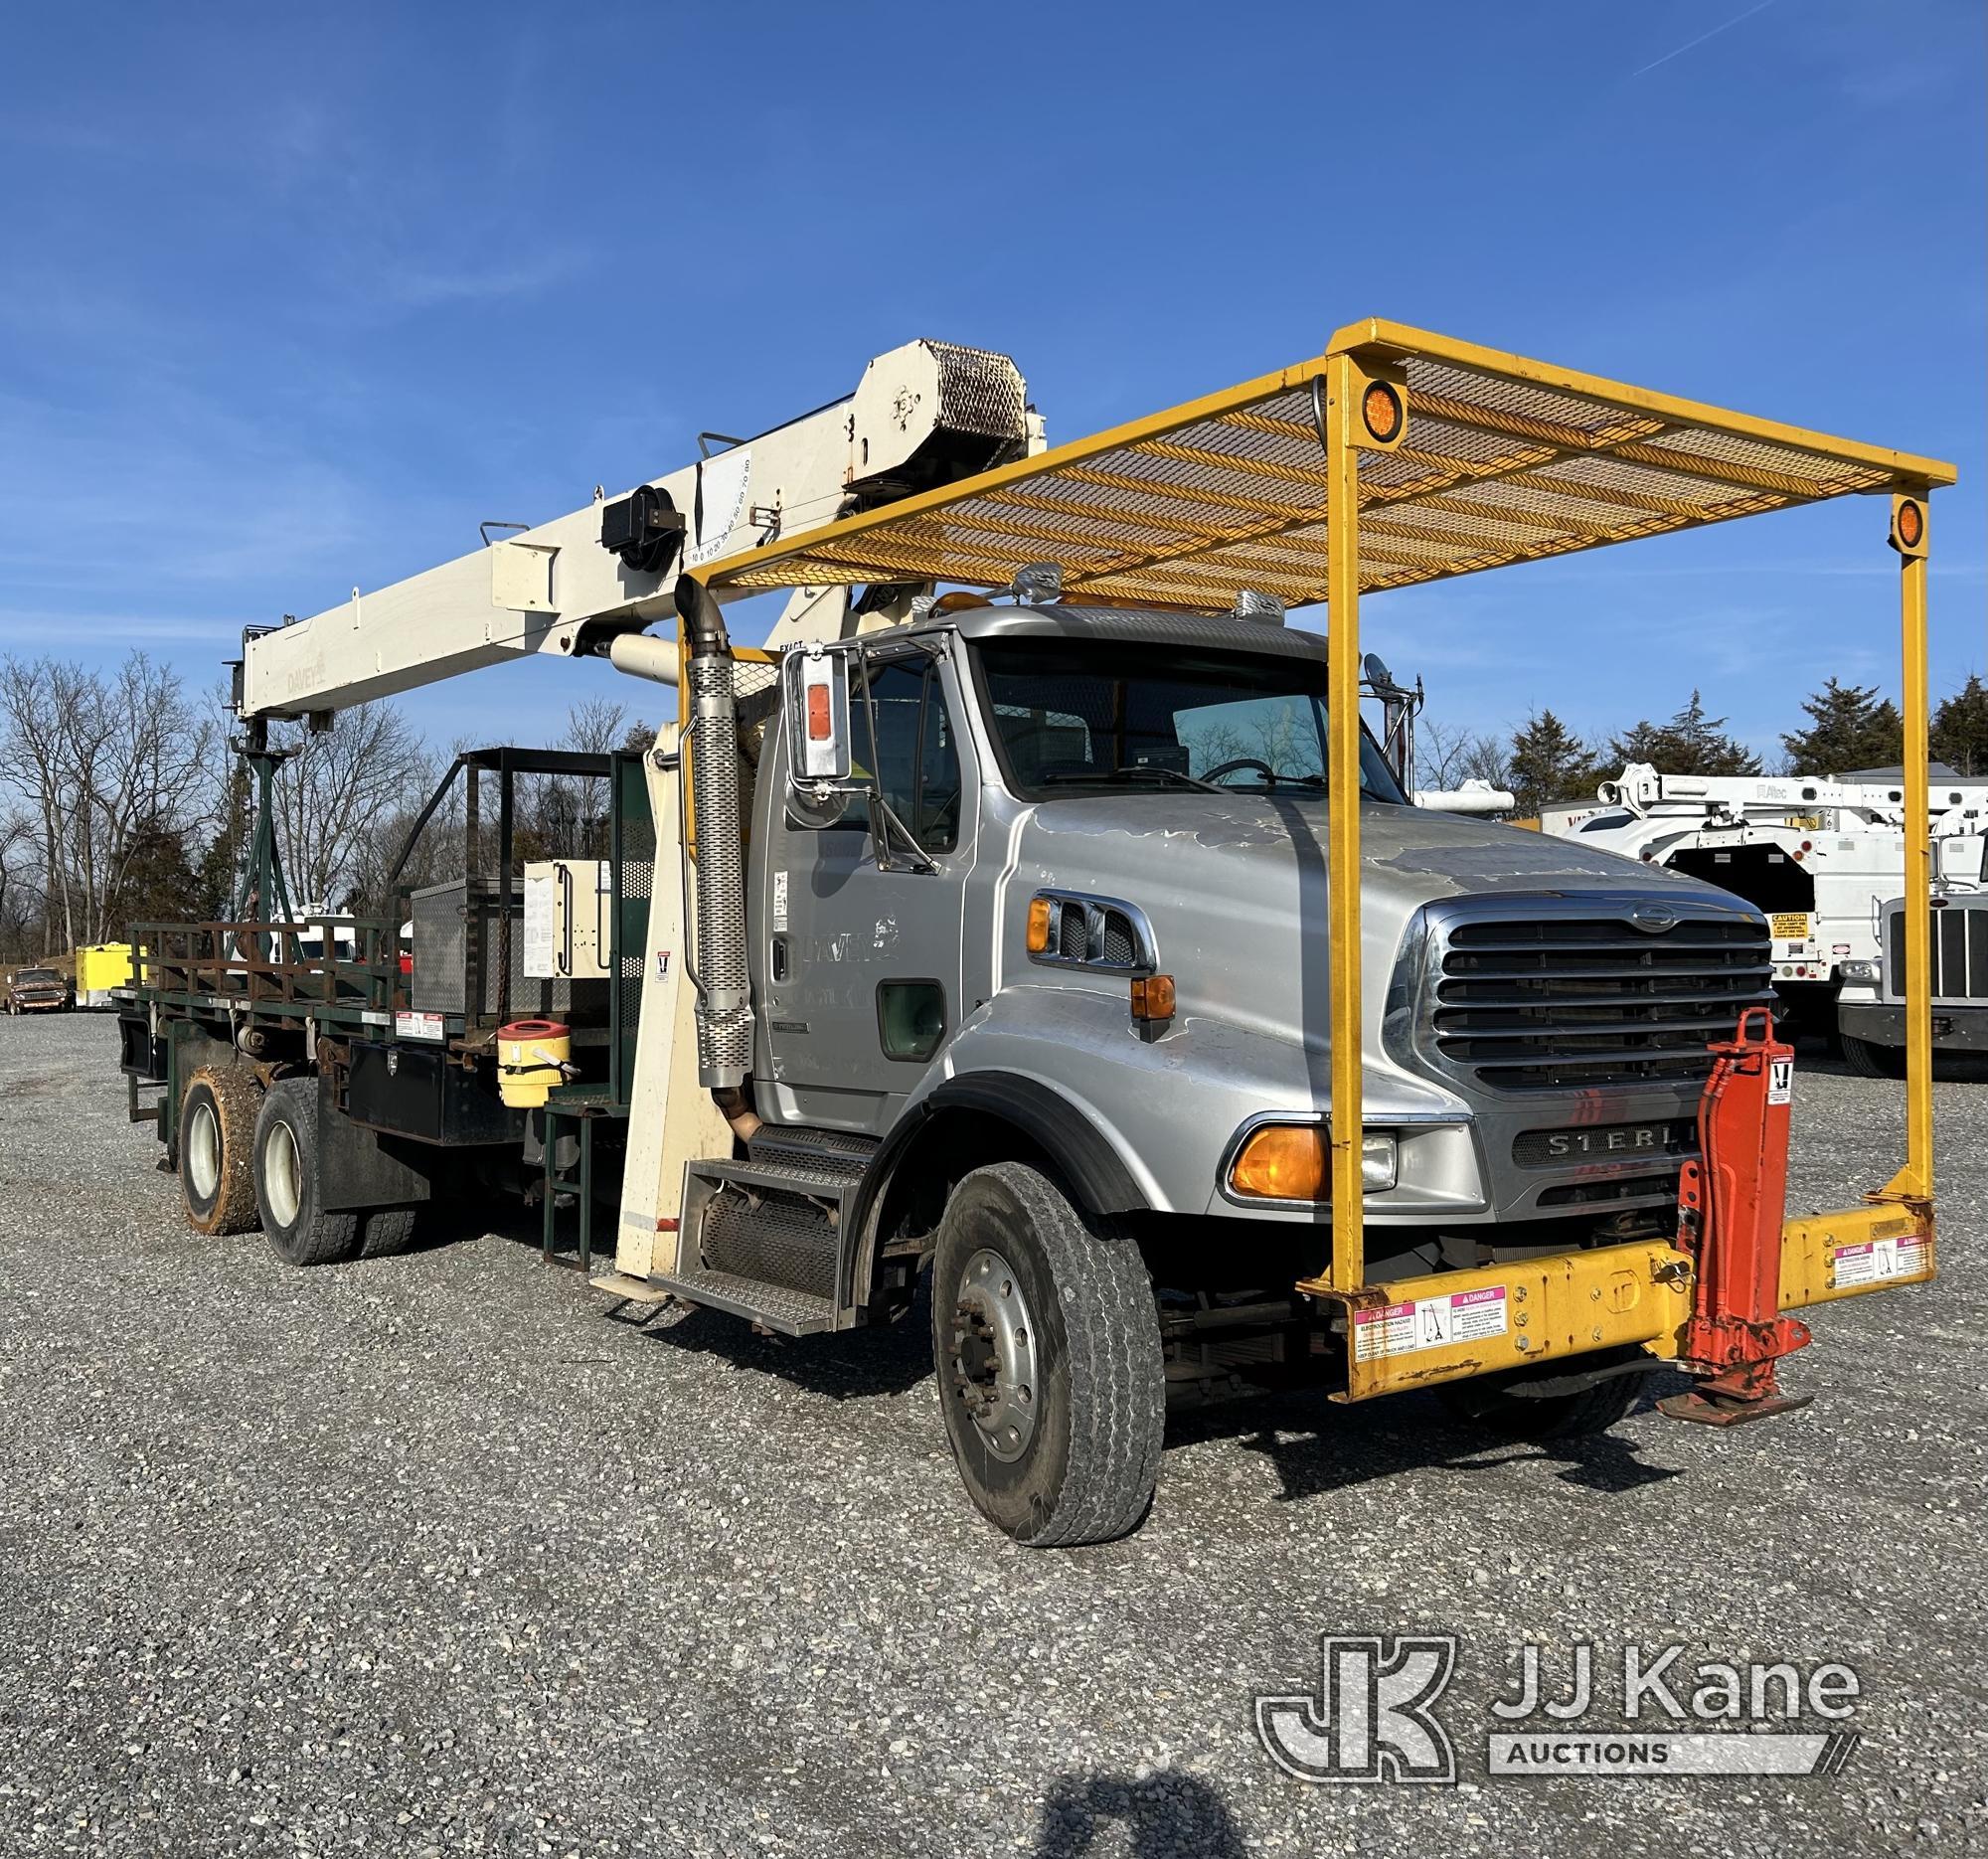 (Hagerstown, MD) National Crane Corp. 800-D, Crane mounted on 2009 Sterling LT8500 6x4 Stake Truck R